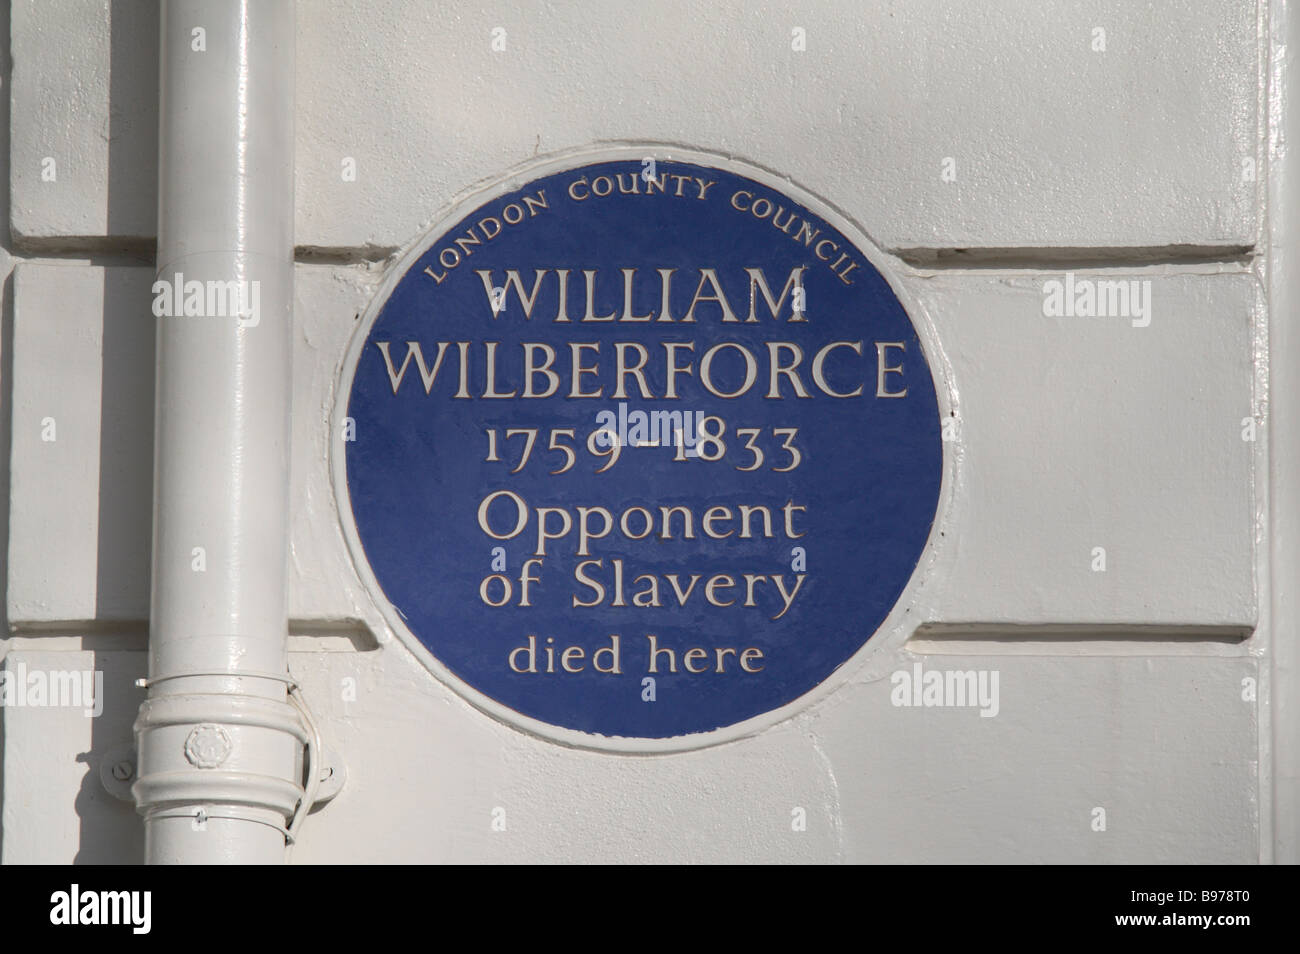 A blue plaque marking the building where the opponent of slavery, William Wilberforce died in 1833..  Mar 2009 Stock Photo